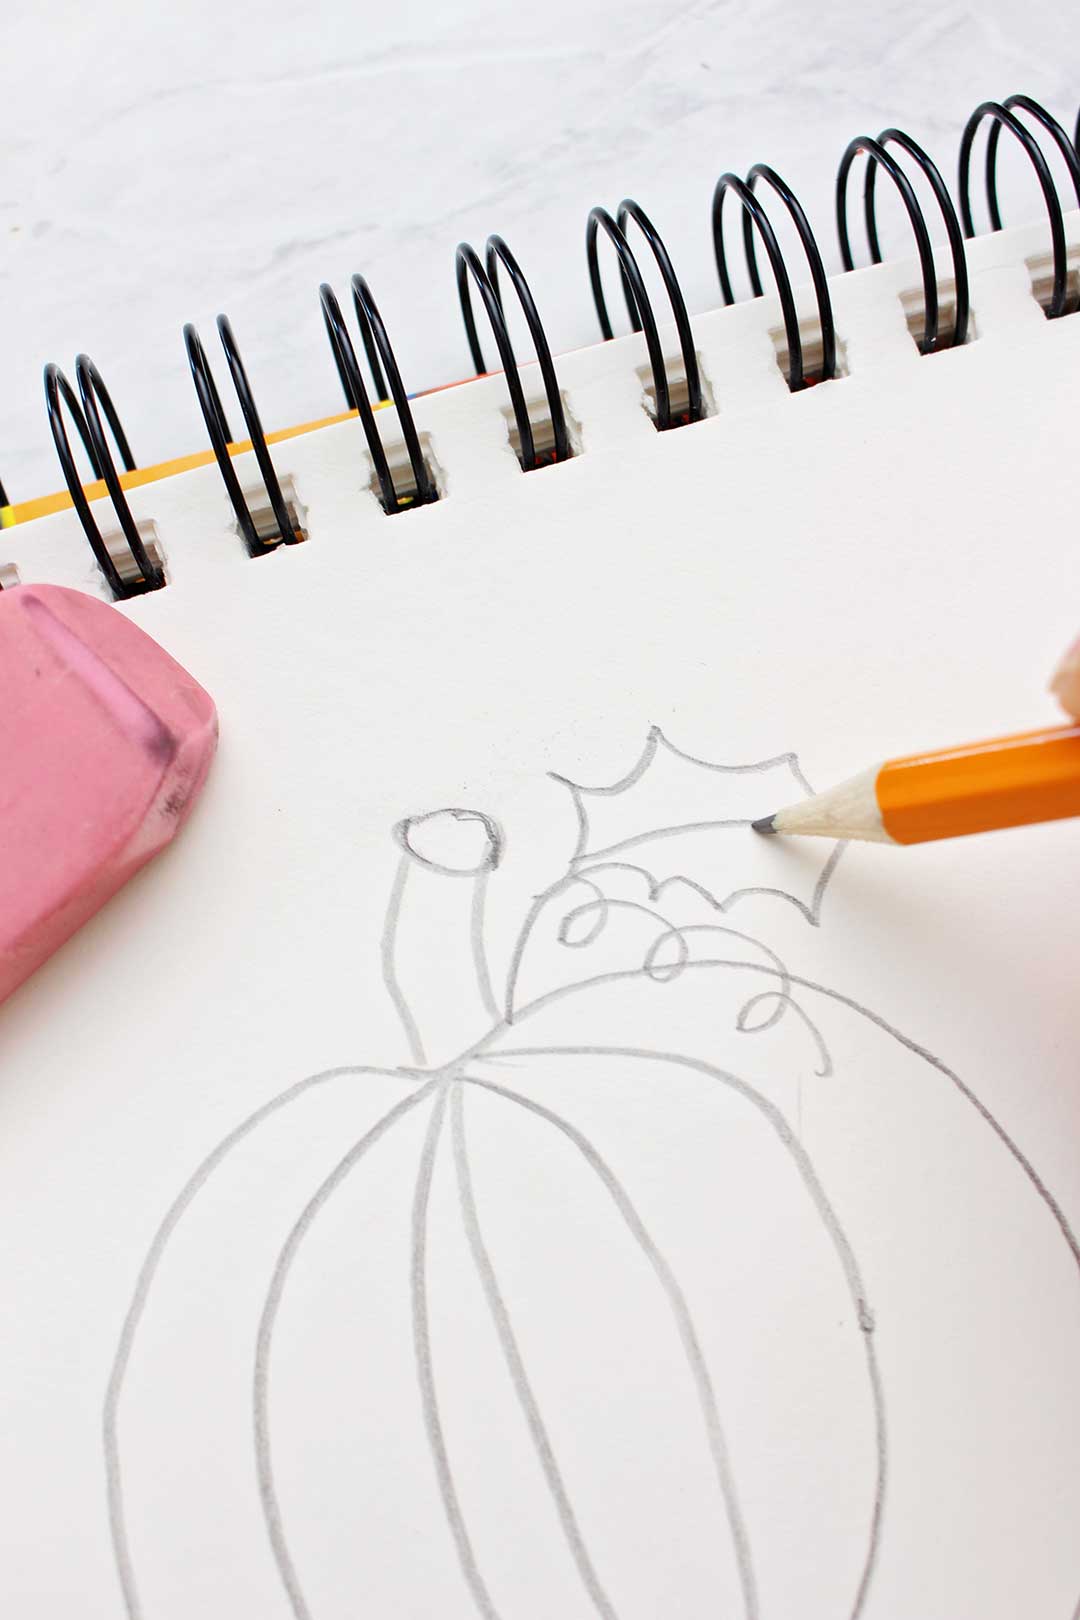 Drawing A Young Girl Hand Drawing A Halloween Pumpkin With Orange Pencil  Behind The Table, Pencil Art, Color Pencil, Color Pen PNG Transparent Image  and Clipart for Free Download